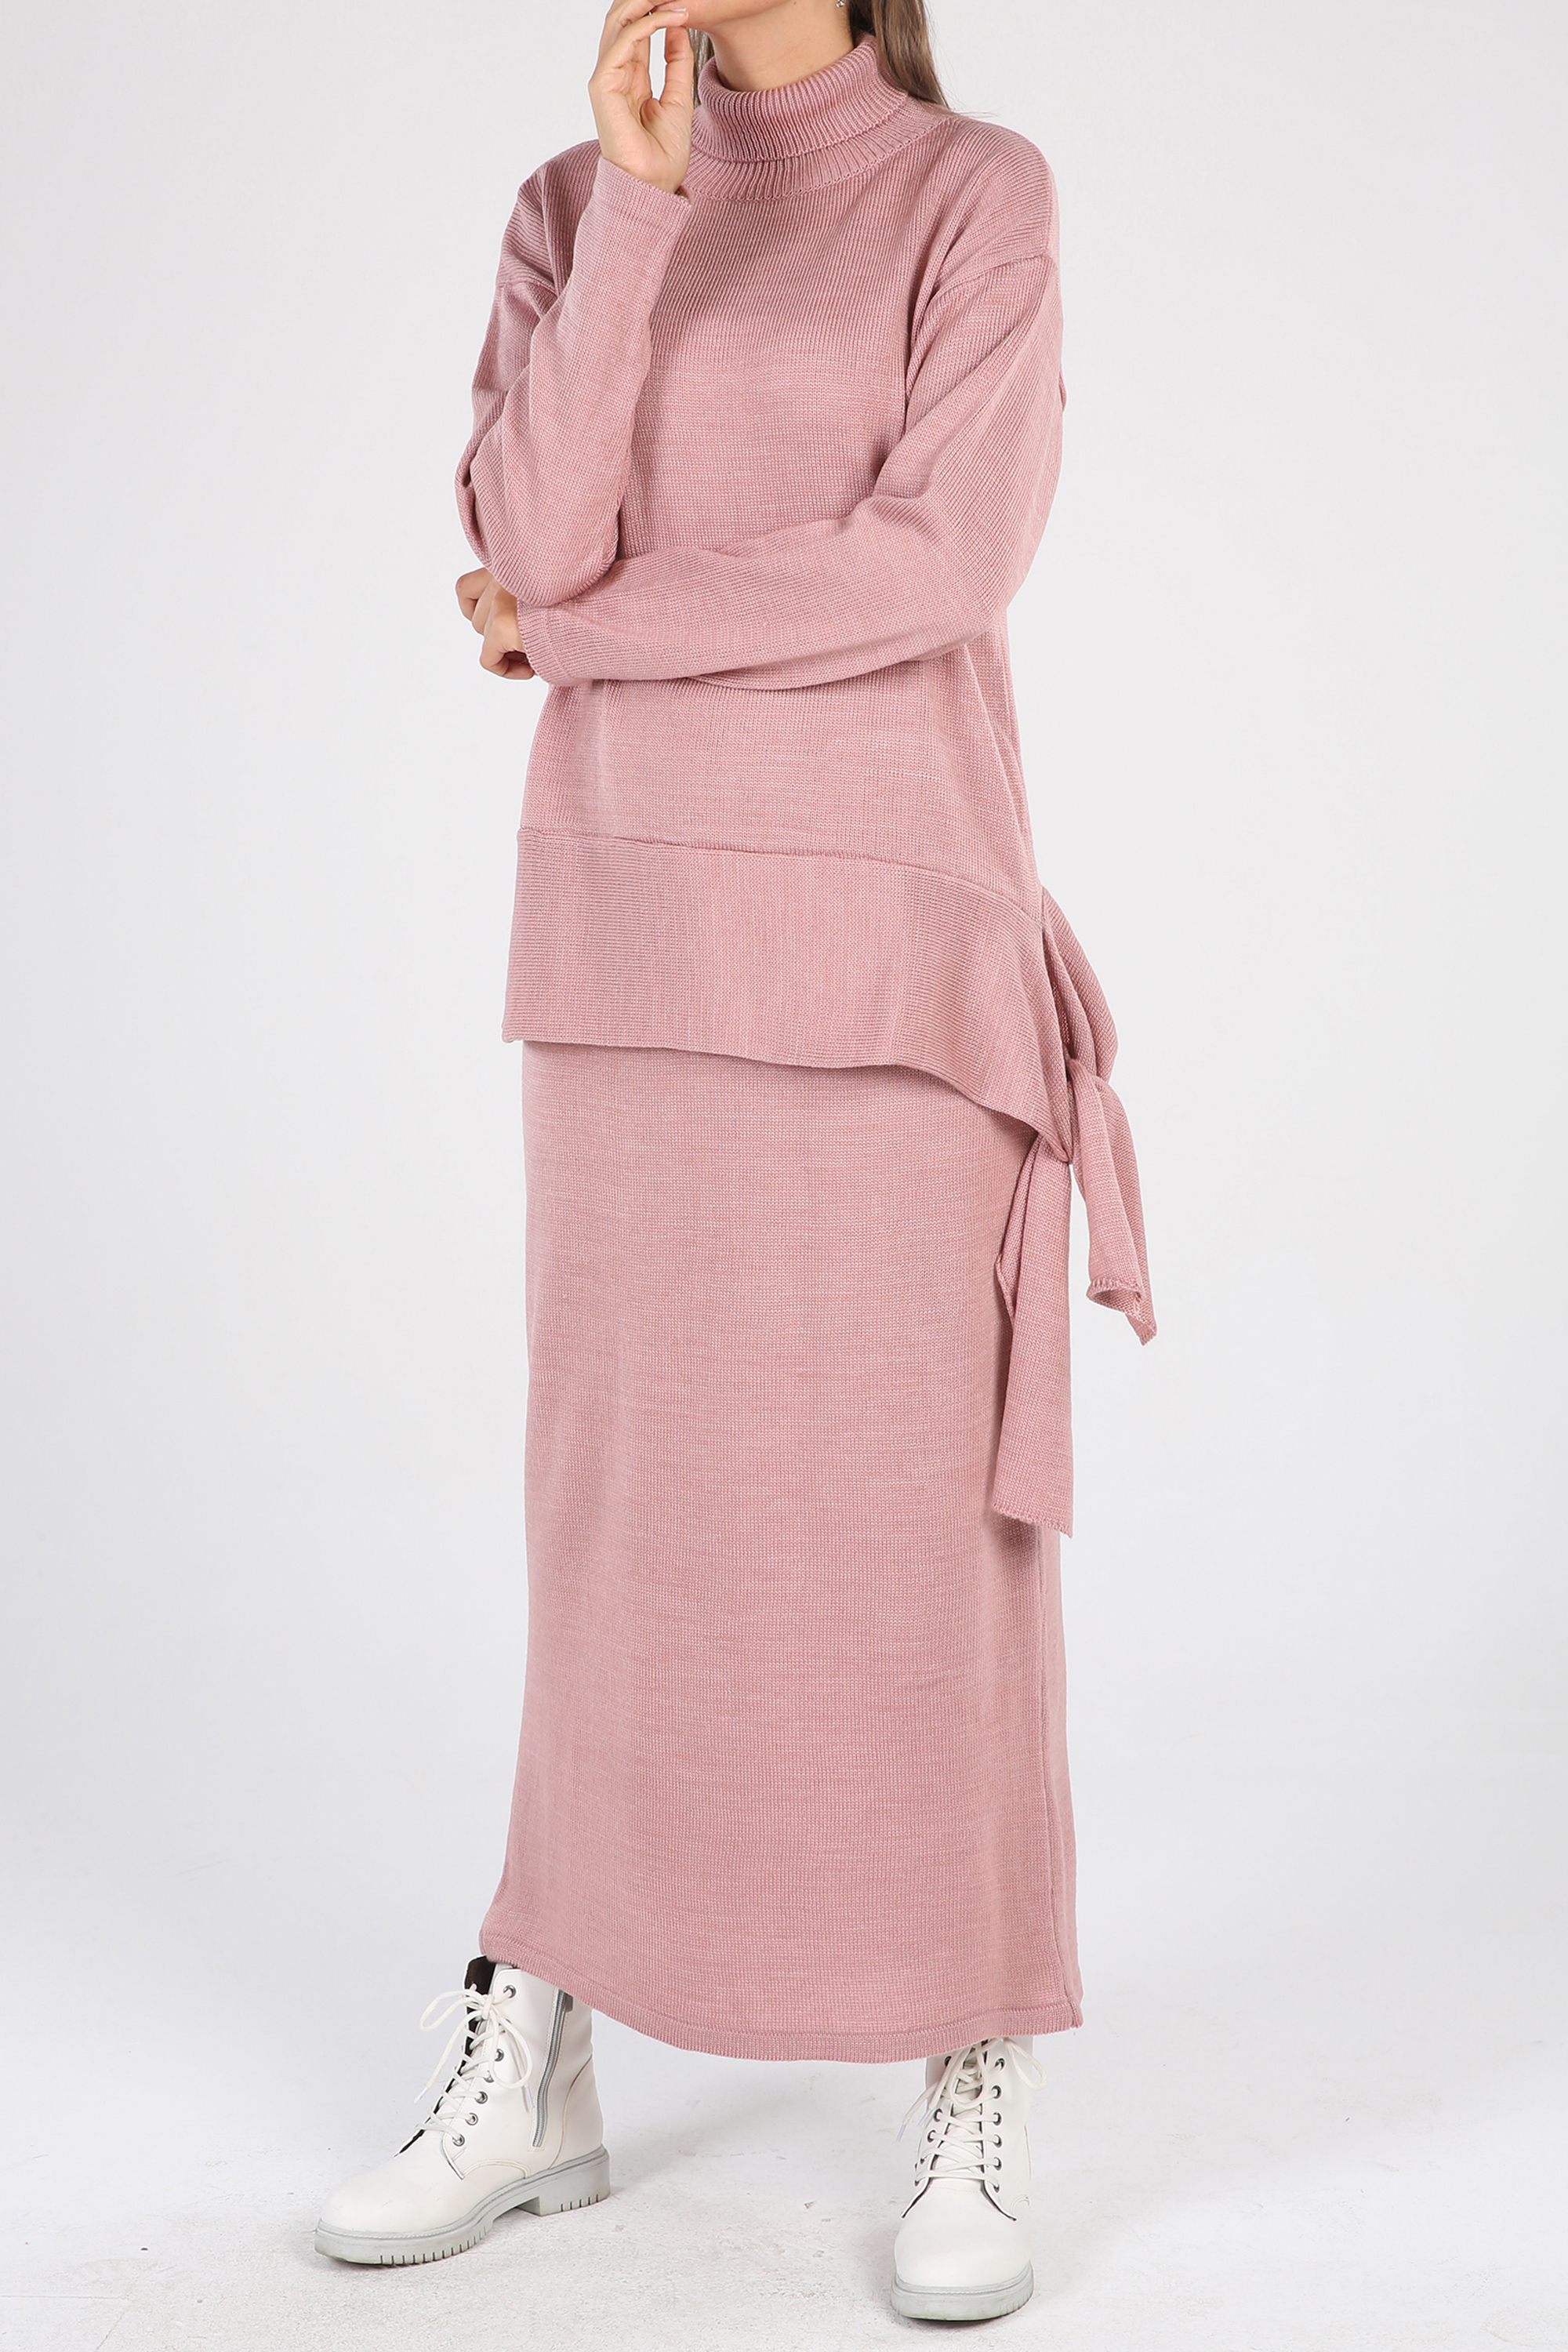 Knitwear Hijab Suit With Skirt